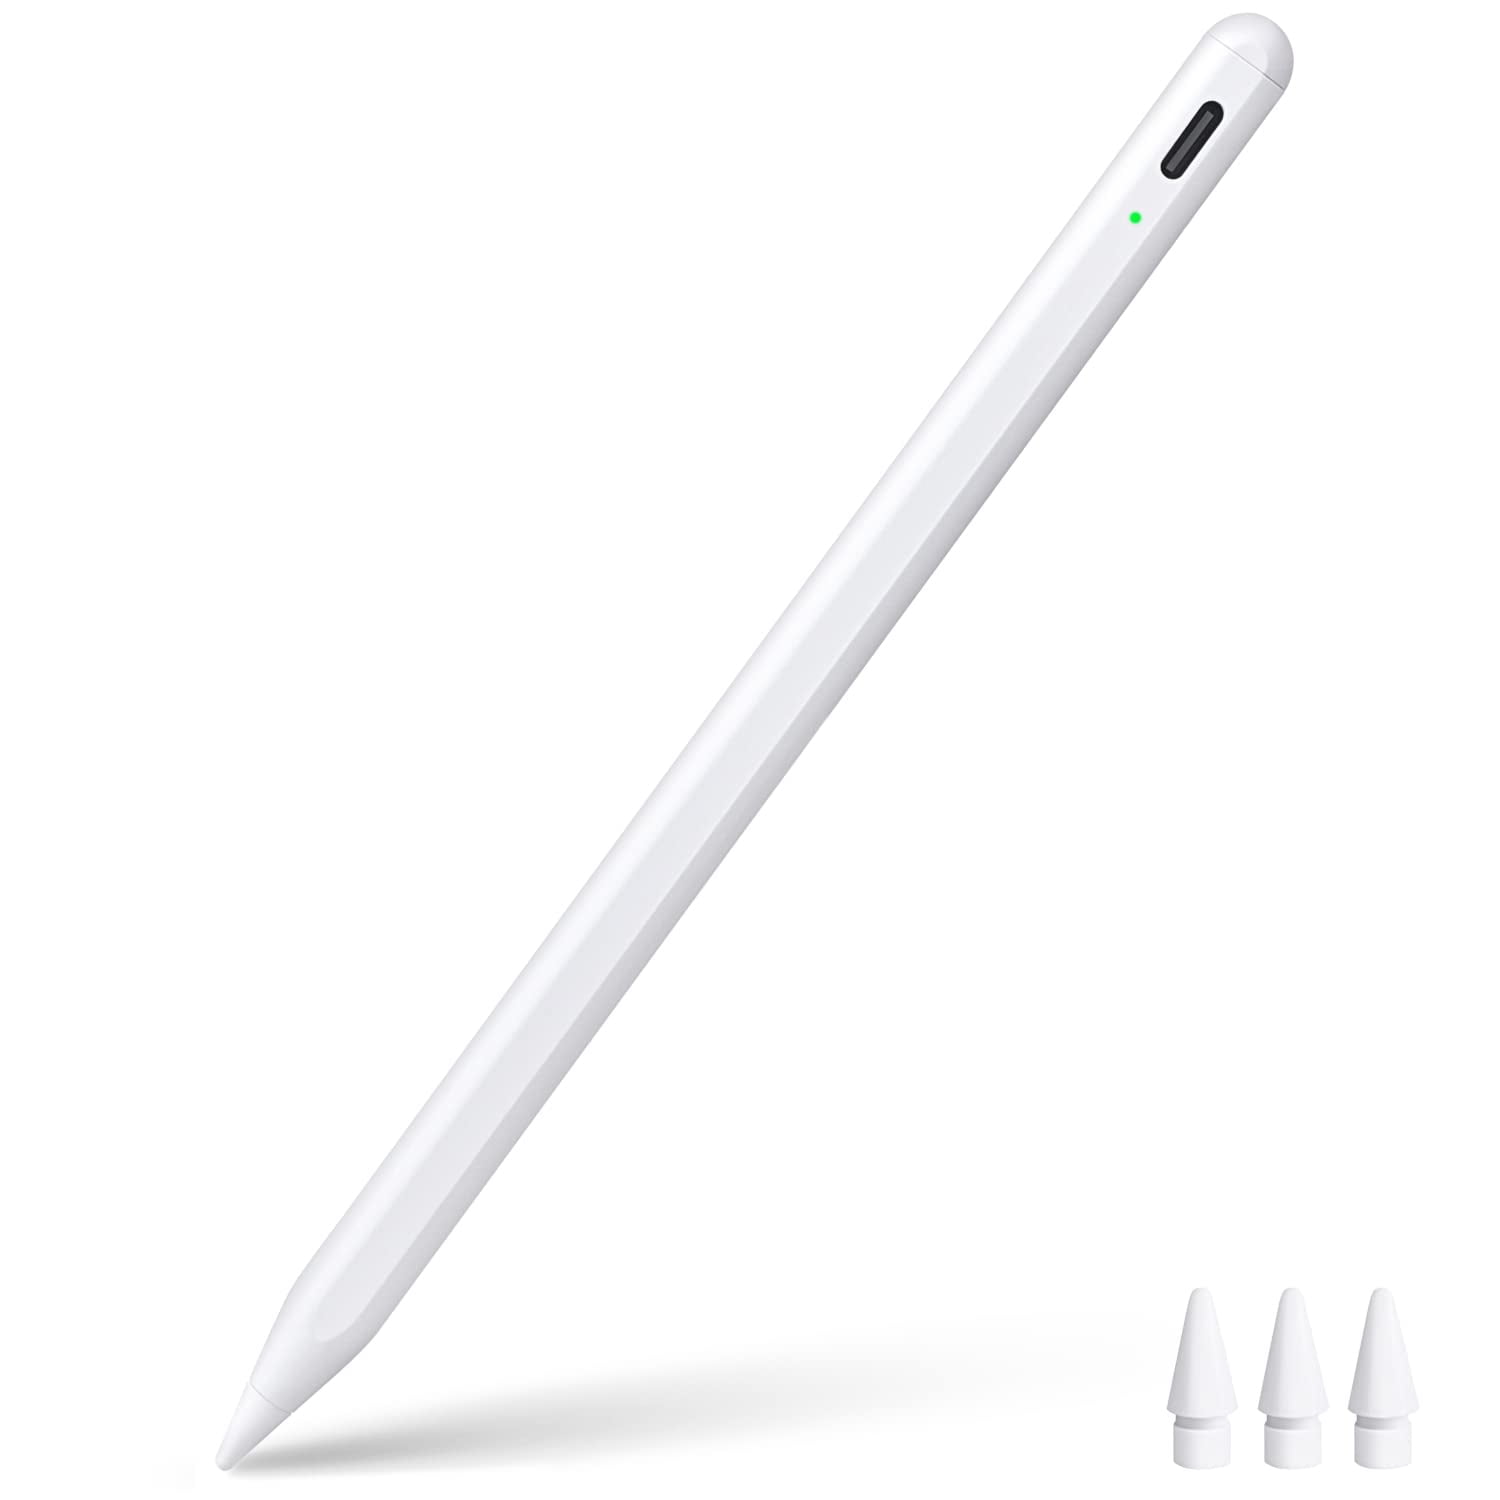 Metapen iPad Pencil A14 Wireless Magnetic Charge丨Best Alternative